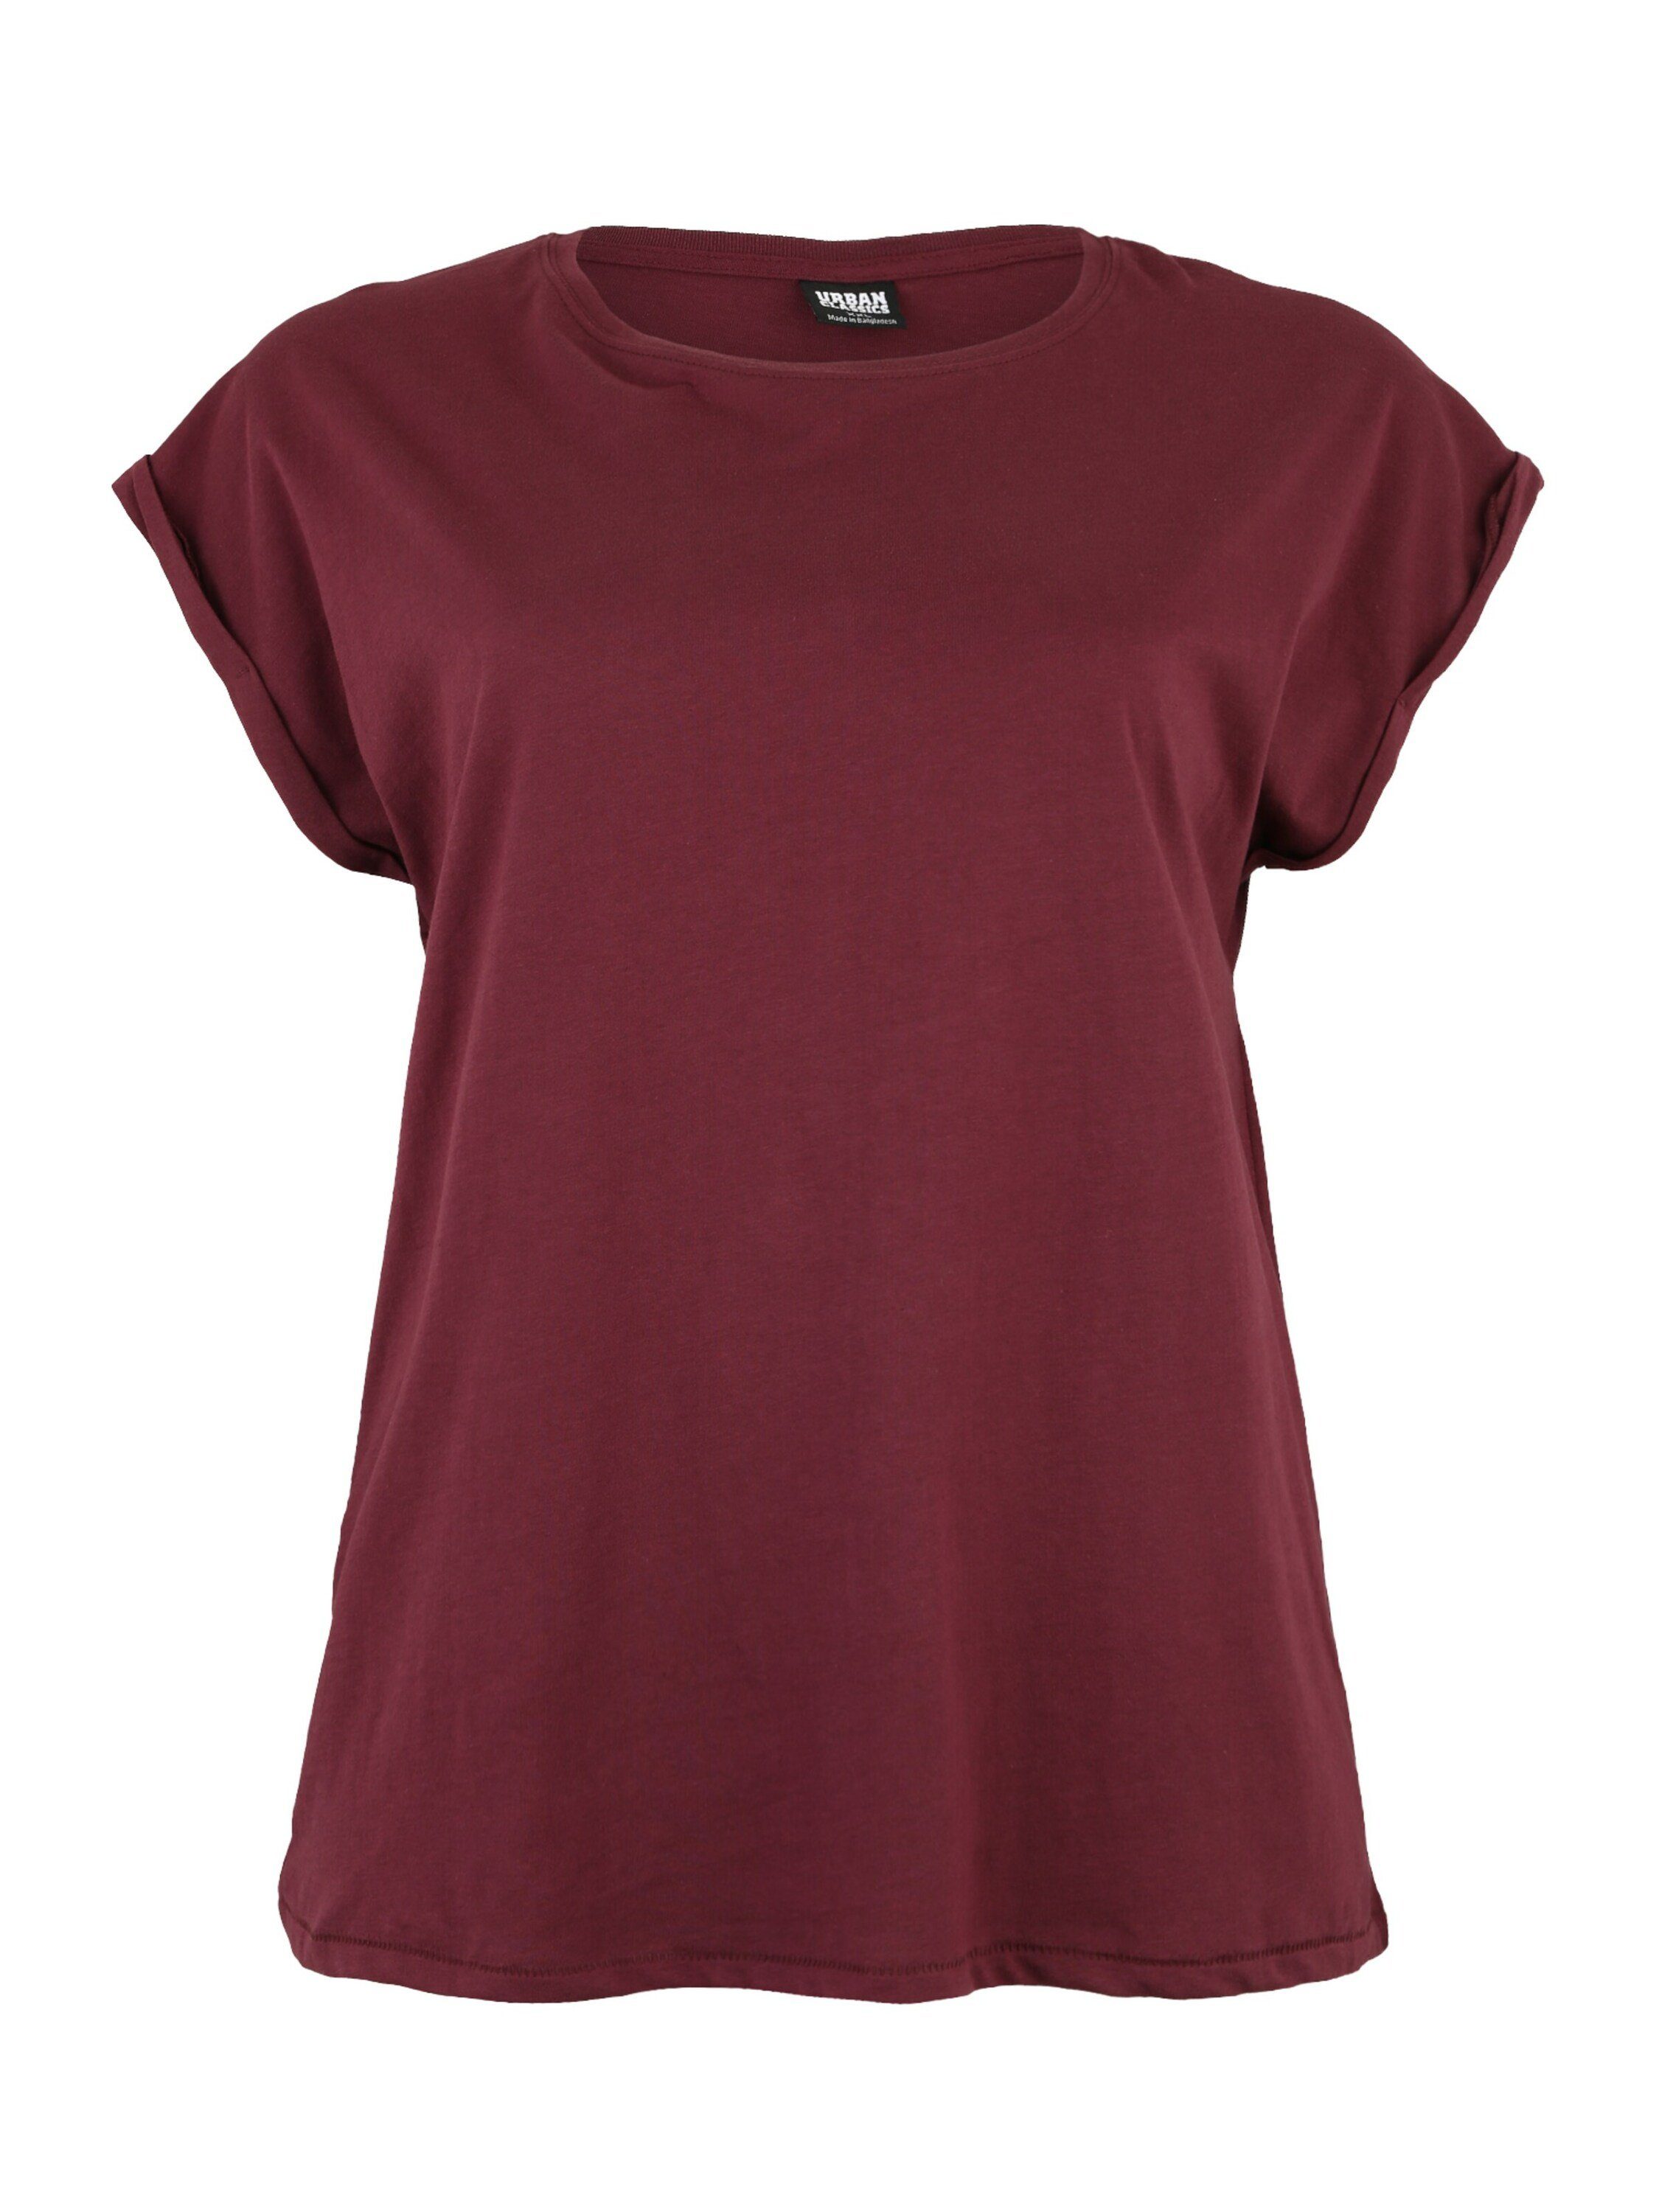 URBAN CLASSICS T-Shirt (1-tlg) Weiteres Detail, Plain/ohne Details brombeer